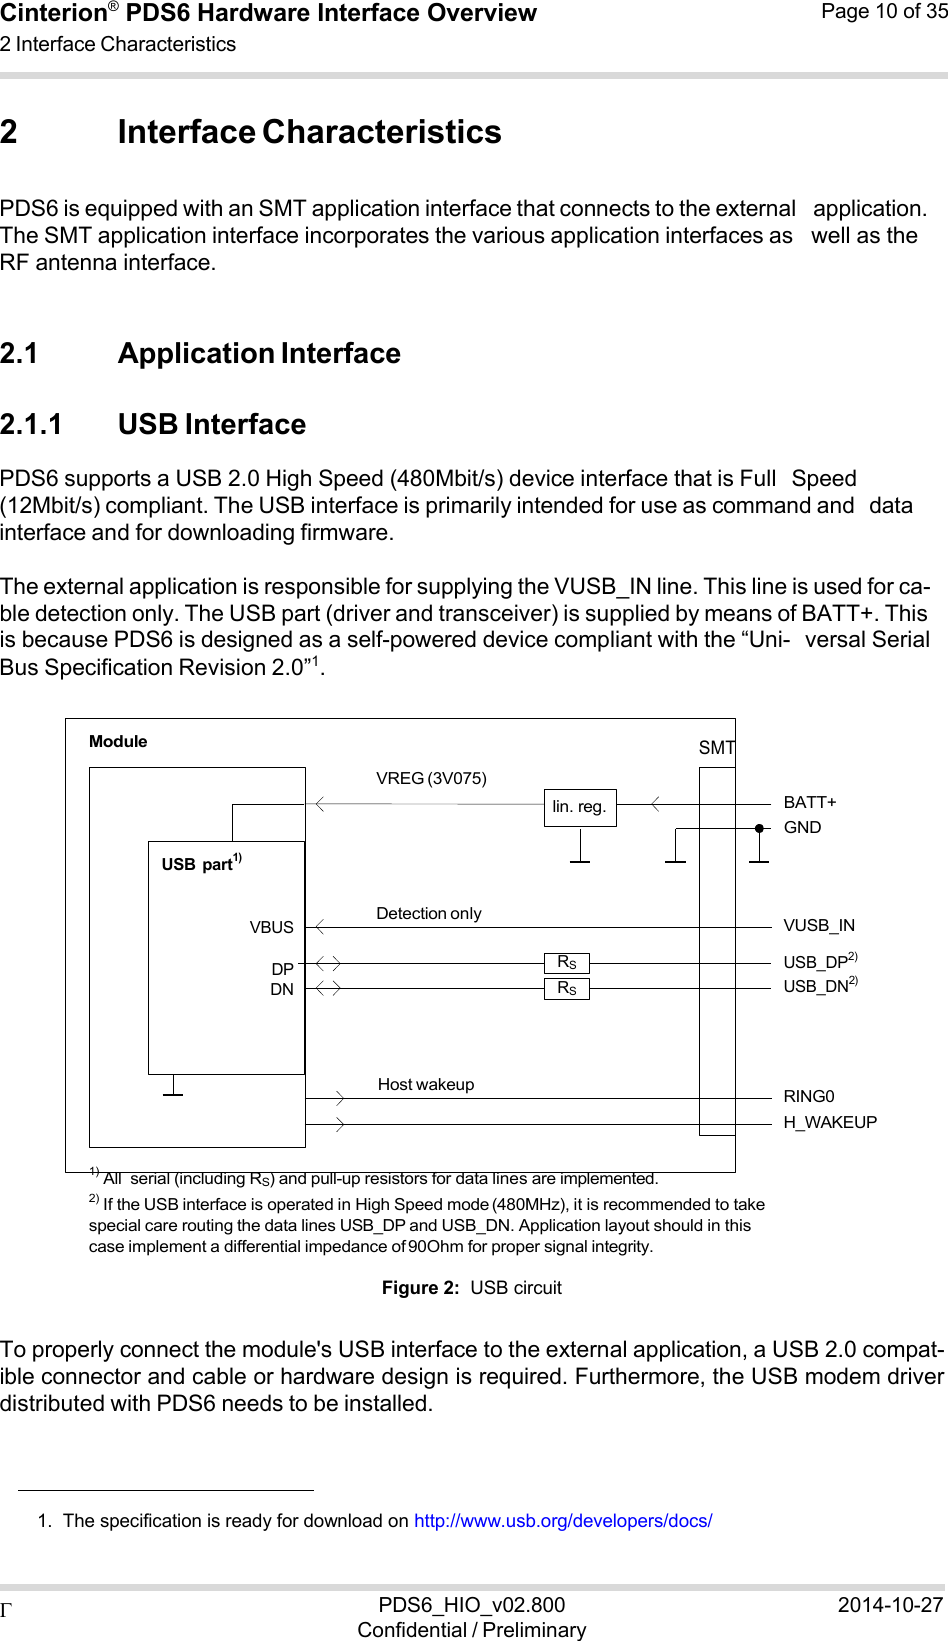  PDS6_HIO_v02.800Confidential / Preliminary2014-10-27Cinterion®  PDS6 Hardware Interface Overview 2 Interface Characteristics Page 10 of 35   2 Interface Characteristics  PDS6 is equipped with an SMT application interface that connects to the external application. The SMT application interface incorporates the various application interfaces as well as the RF antenna interface.   2.1 Application Interface  2.1.1 USB Interface PDS6 supports a USB 2.0 High Speed (480Mbit/s) device interface that is Full Speed (12Mbit/s) compliant. The USB interface is primarily intended for use as command and data interface and for downloading firmware.  The external application is responsible for supplying the VUSB_IN line. This line is used for ca- ble detection only. The USB part (driver and transceiver) is supplied by means of BATT+. This is because PDS6 is designed as a self-powered device compliant with the “Uni- versal Serial Bus Specification Revision 2.0”1.   Module       USB  part1)    VREG (3V075)      lin. reg.  SMT     BATT+ GND   VBUS  DP DN Detection only  RS RS  VUSB_IN USB_DP2) USB_DN2)    Host wakeup   RING0 H_WAKEUP  1) All  serial (including RS) and pull-up resistors for data lines are implemented. 2) If the USB interface is operated in High Speed mode (480MHz), it is recommended to take special care routing the data lines USB_DP and USB_DN. Application layout should in this case implement a differential impedance of 90Ohm for proper signal integrity.  Figure 2:  USB circuit  To properly connect the module&apos;s USB interface to the external application, a USB 2.0 compat- ible connector and cable or hardware design is required. Furthermore, the USB modem driver distributed with PDS6 needs to be installed.      1.  The specification is ready for download on http://www.usb.org/developers/docs/ 